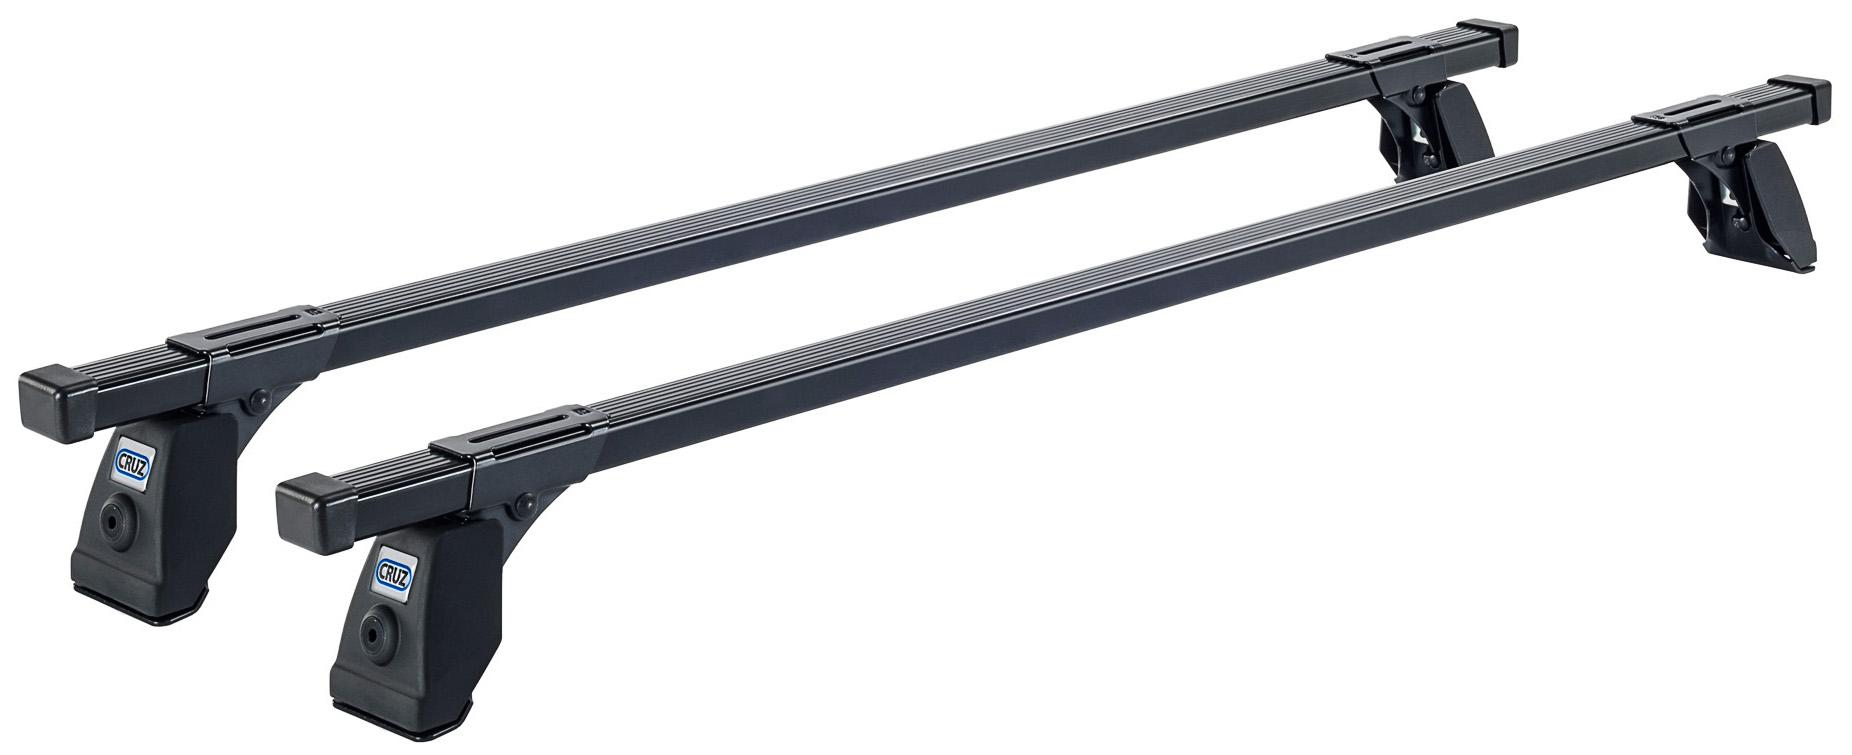 Cruz Commercial Roof Bars 30 X 20 922-411 - Pack Of 2